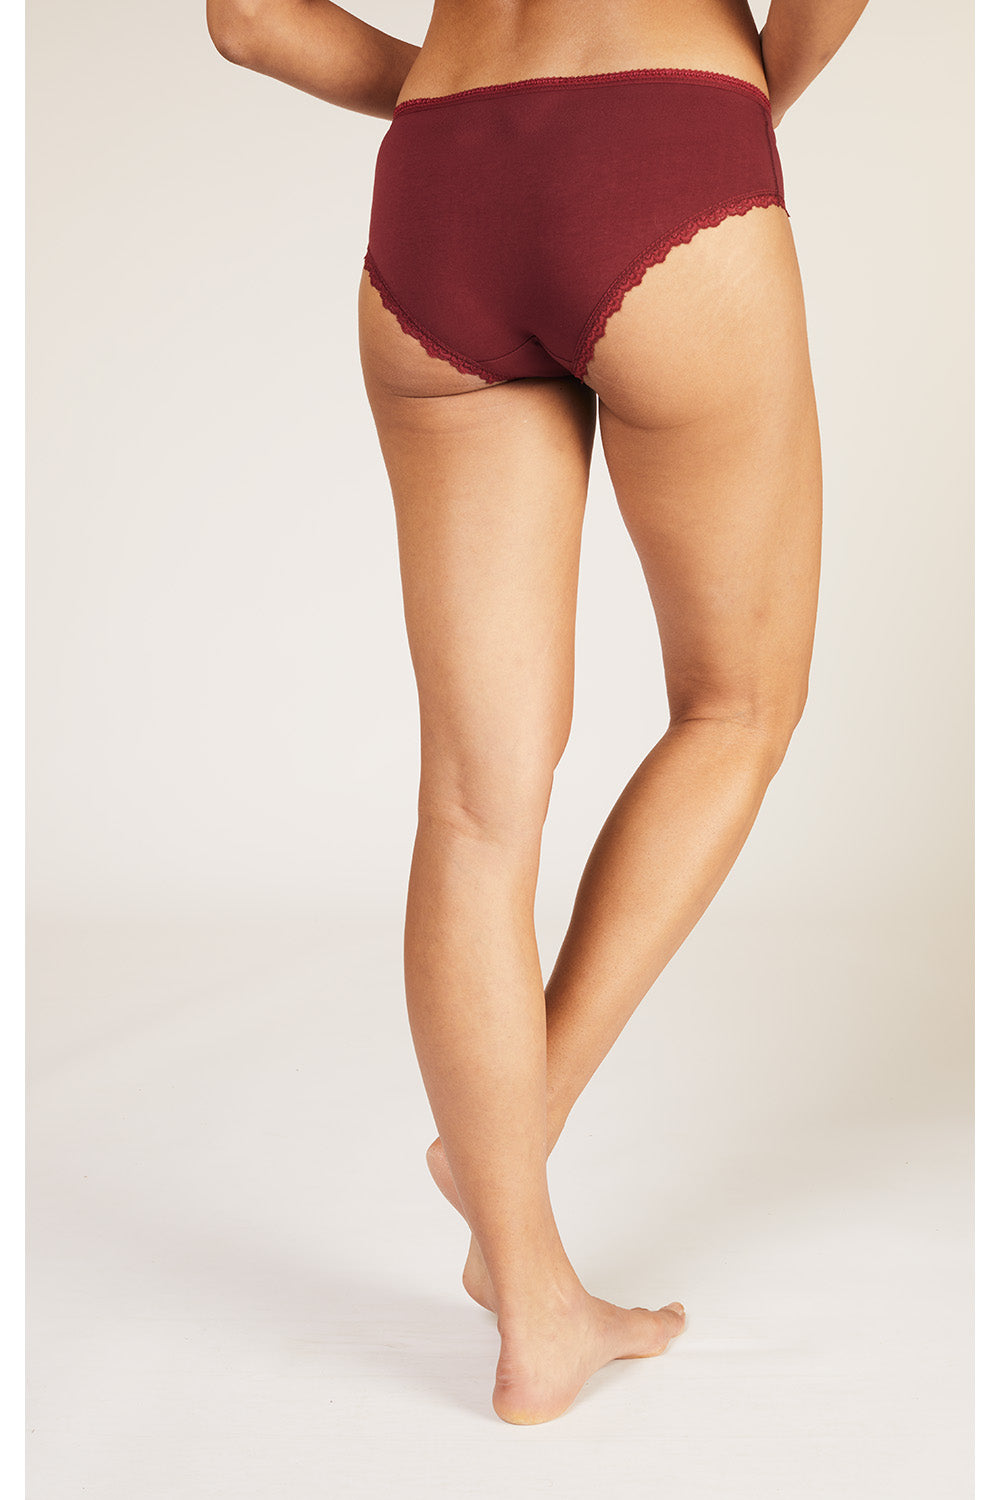 Lace Hipster Underwear in Burgundy – Textile Apparel